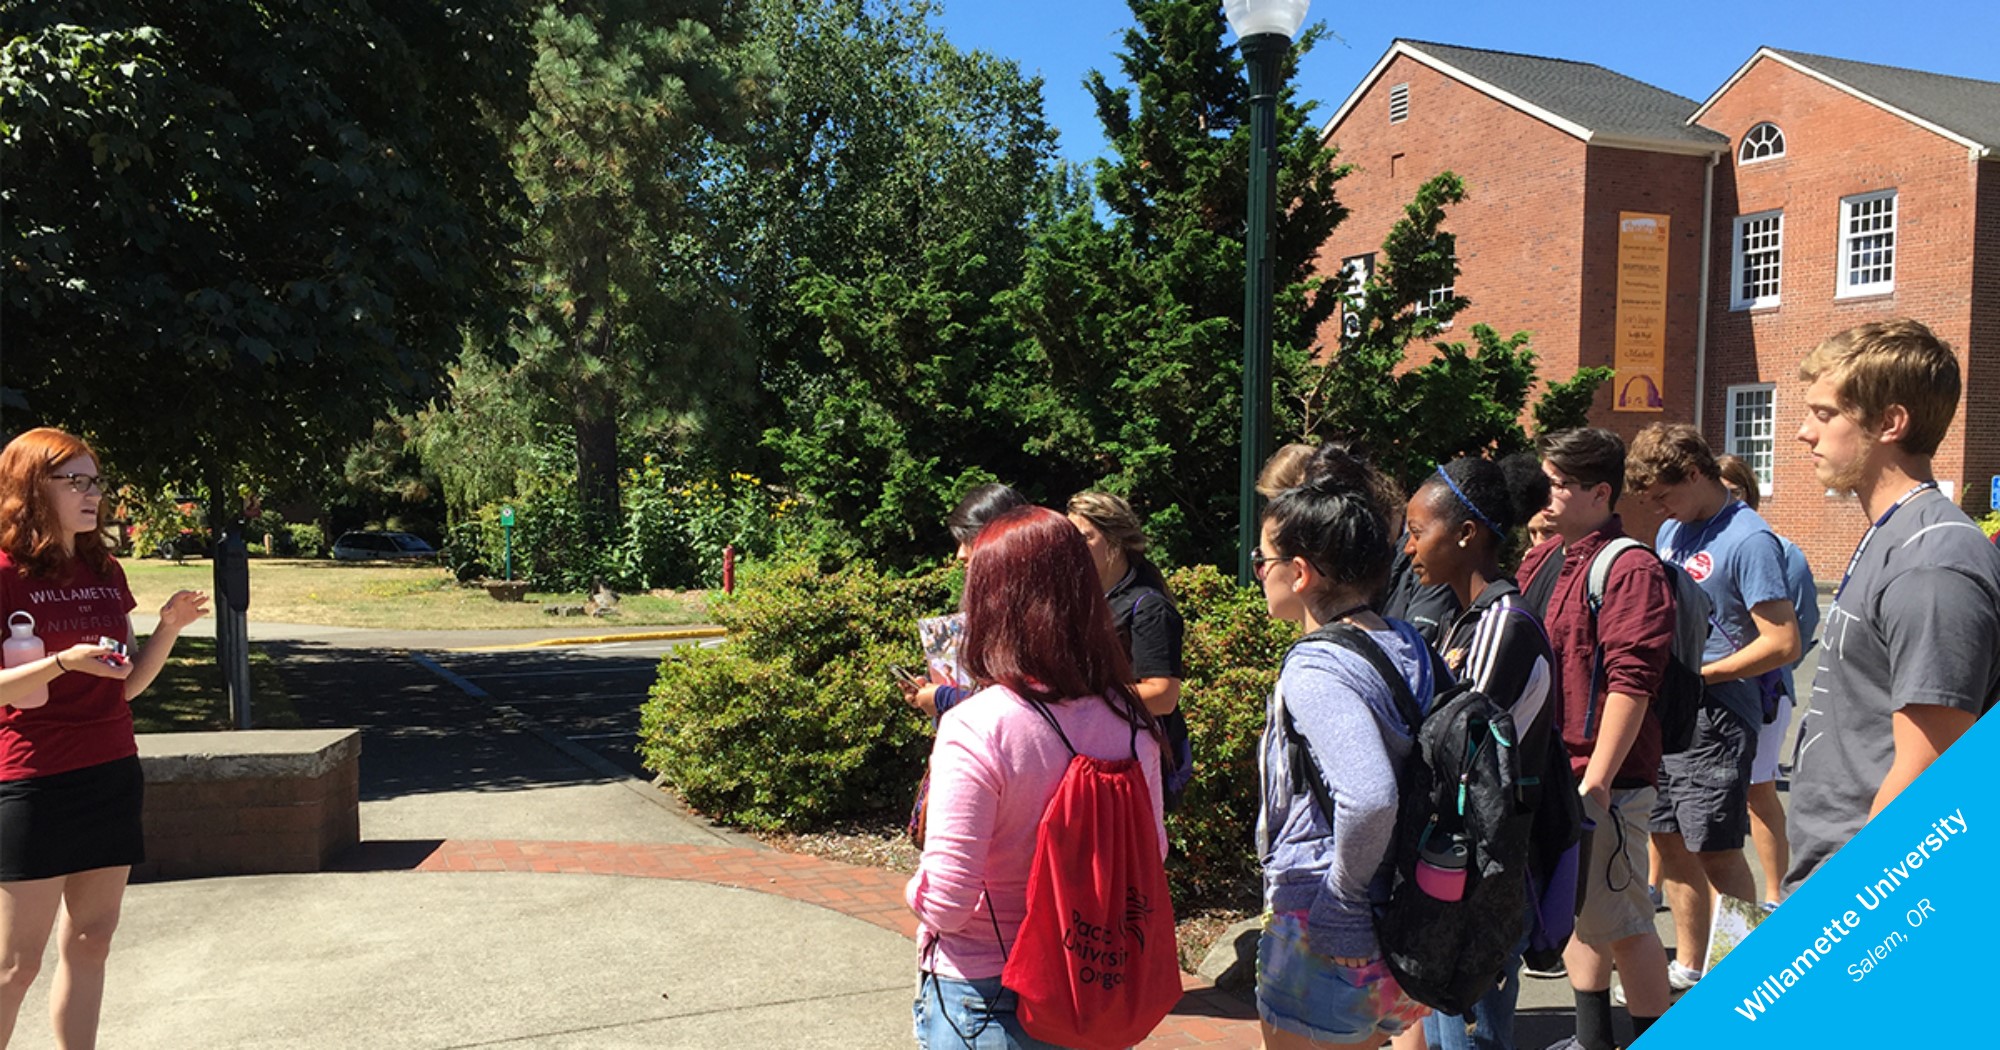 Students on a tour of Willamette University